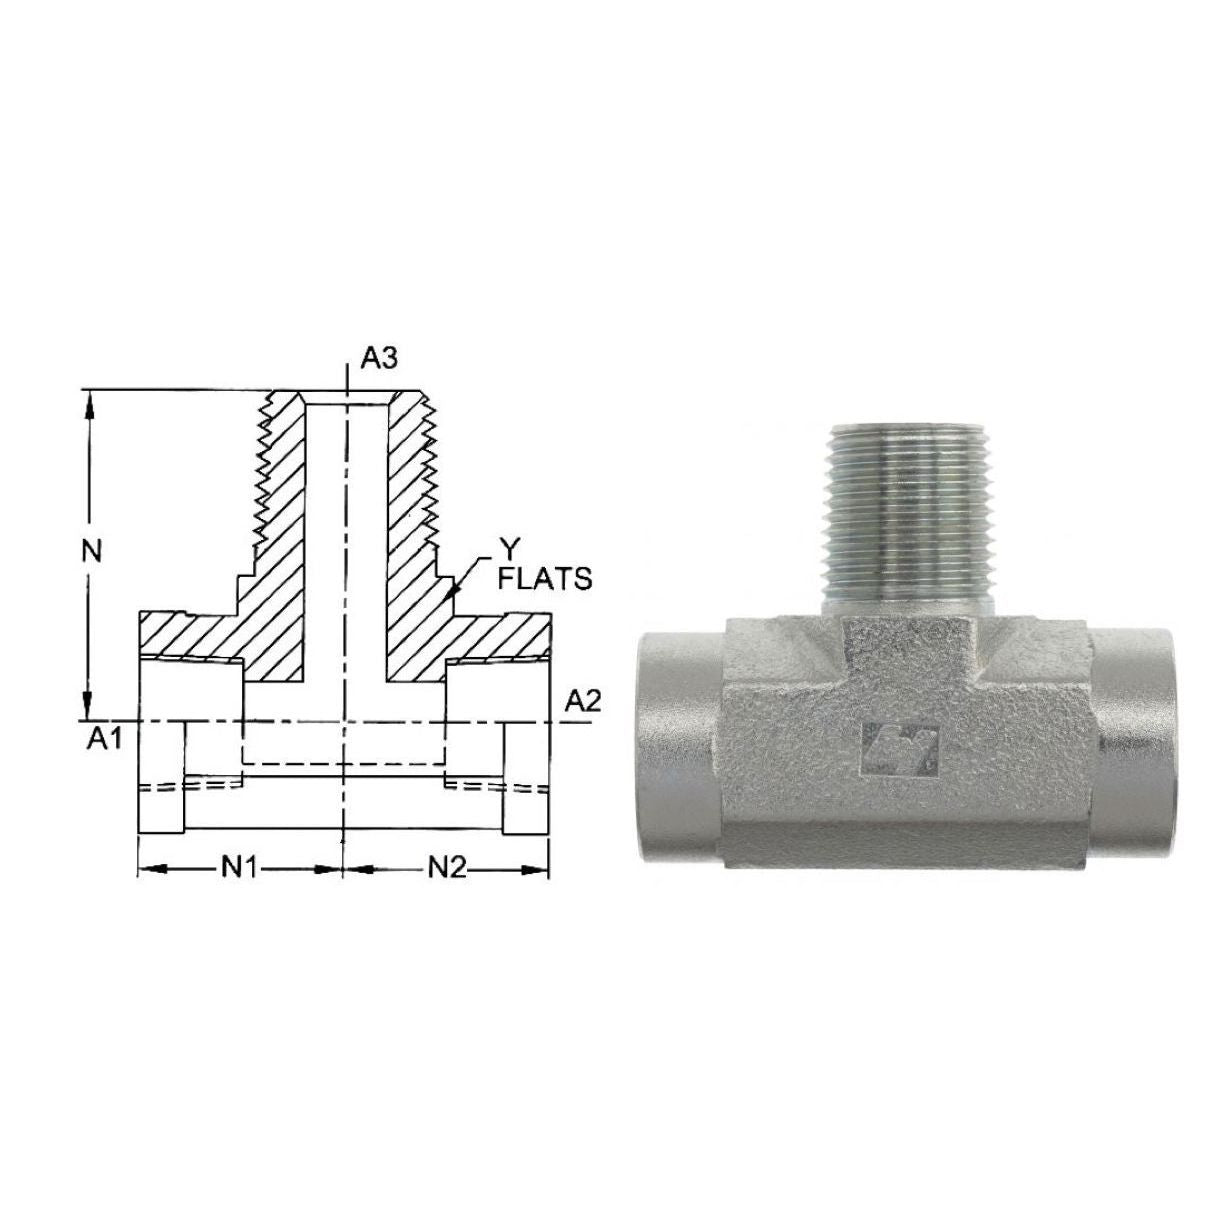 5604-08-08-08-SS : OneHydraulics Branch Tee, 0.5 (1/2) Female NPT x 0.5 (1/2) Female NPT x 0.5 (1/2) Male NPT, Stainless Steel, 6000psi